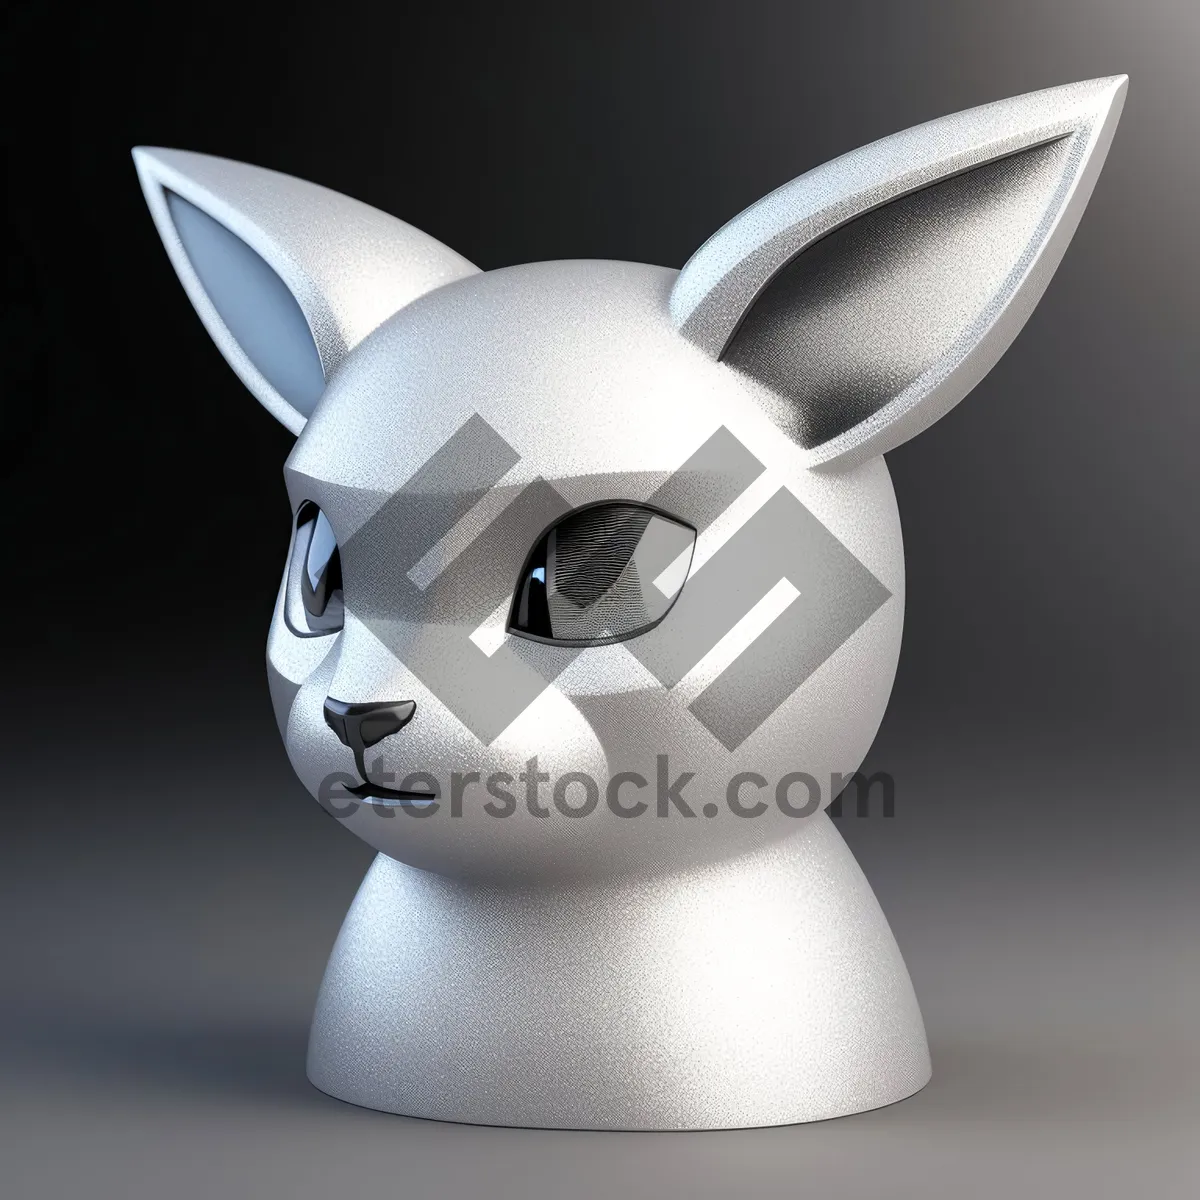 Picture of Adorable 3D Cartoon Rabbit Character in Comic Style